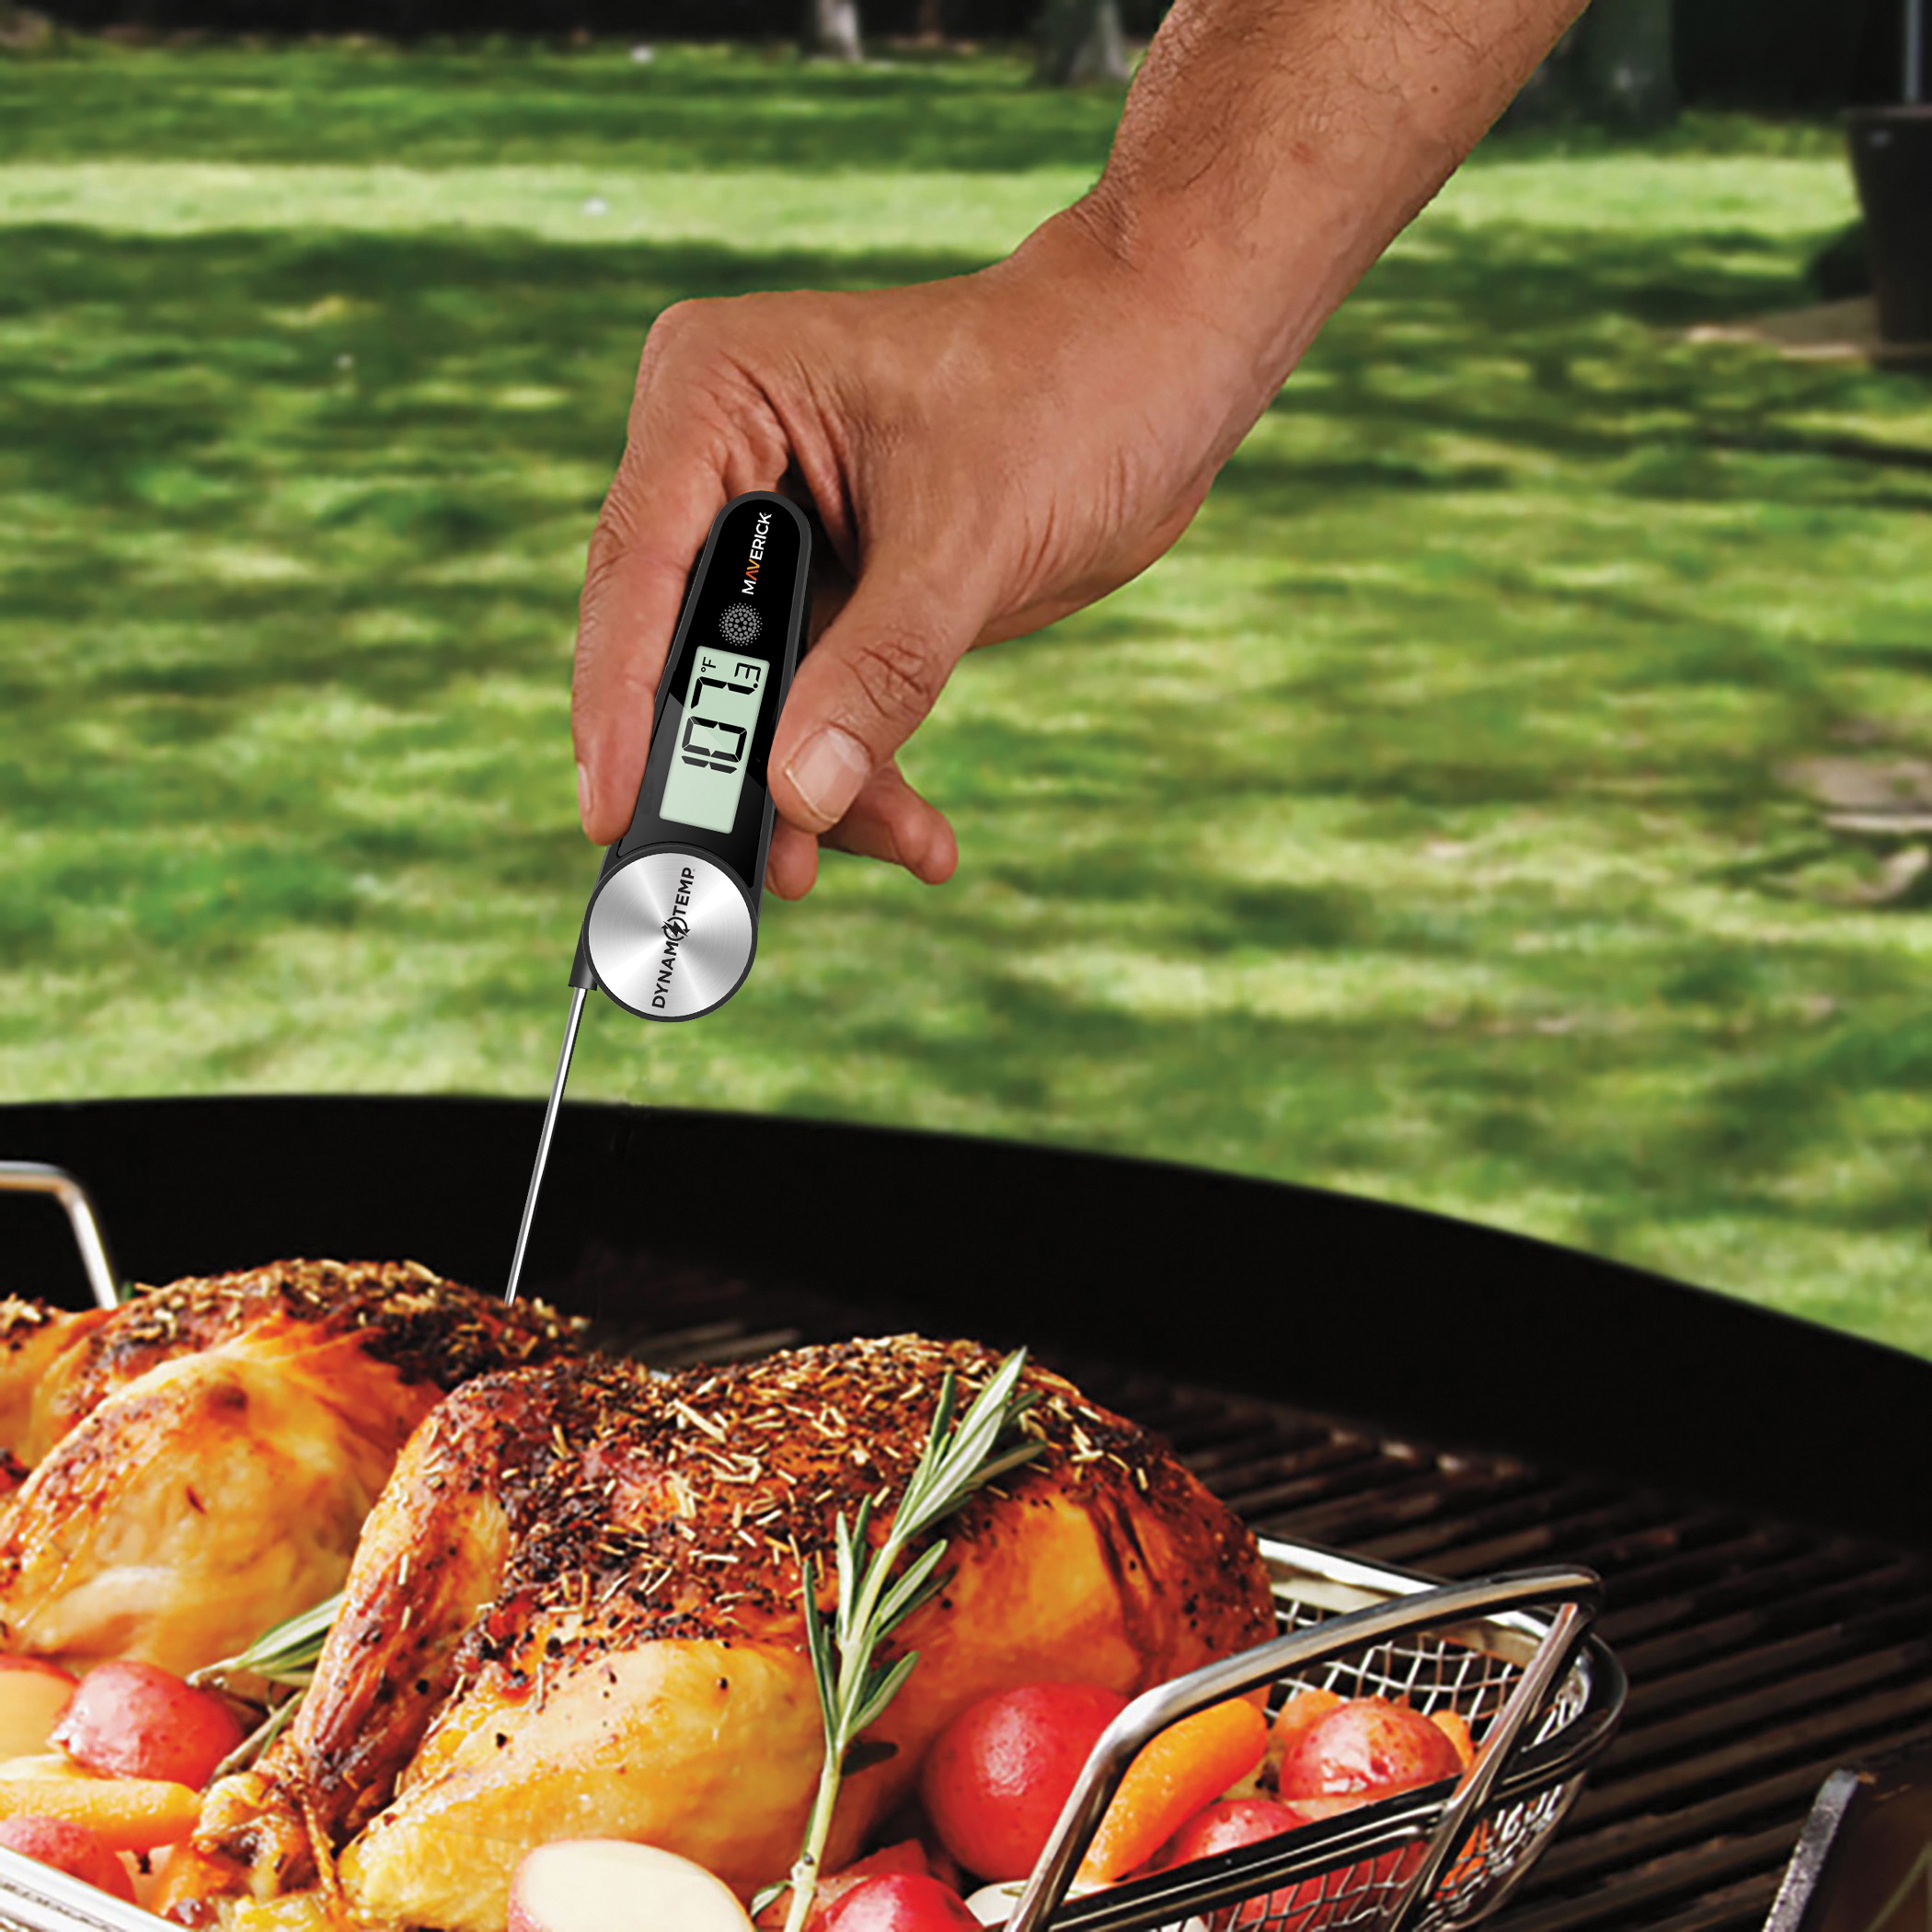 DOQAUS Digital Meat Thermometer, Instant Read Food Thermometer for Cooking,  Kitc